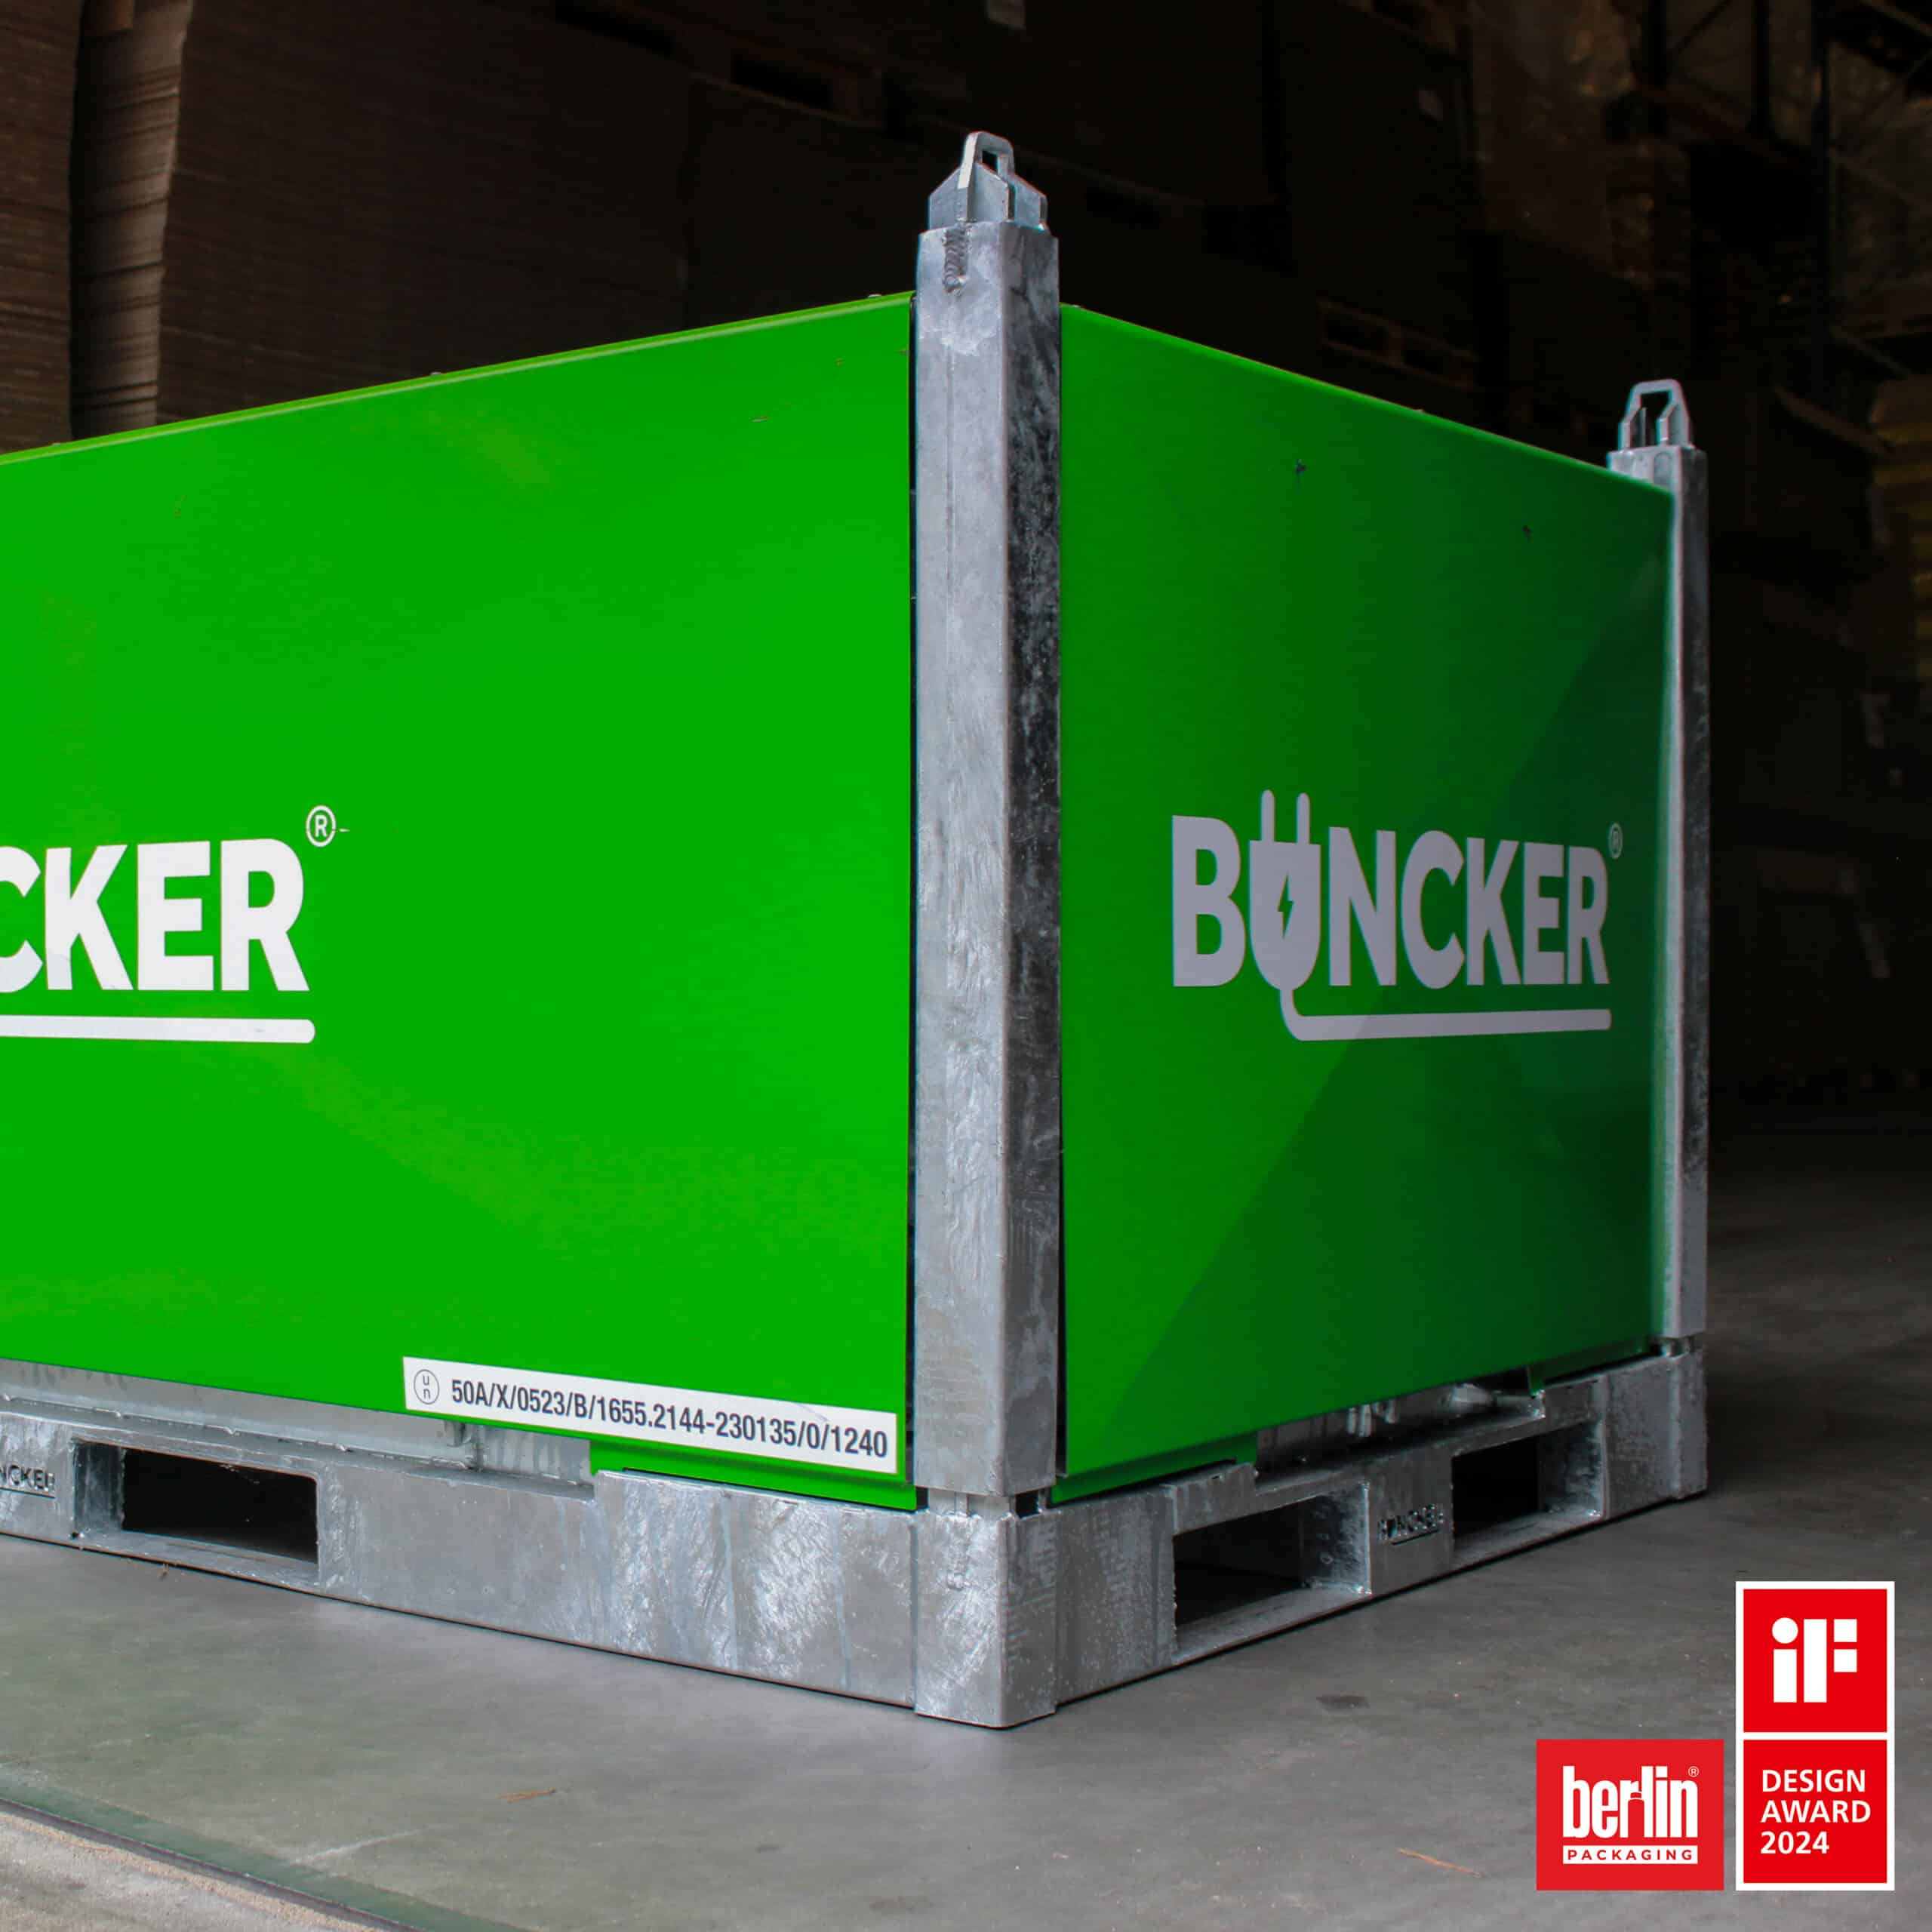 Buncker Picture 1 IF Design Berlin Packaging vierkant scaled News